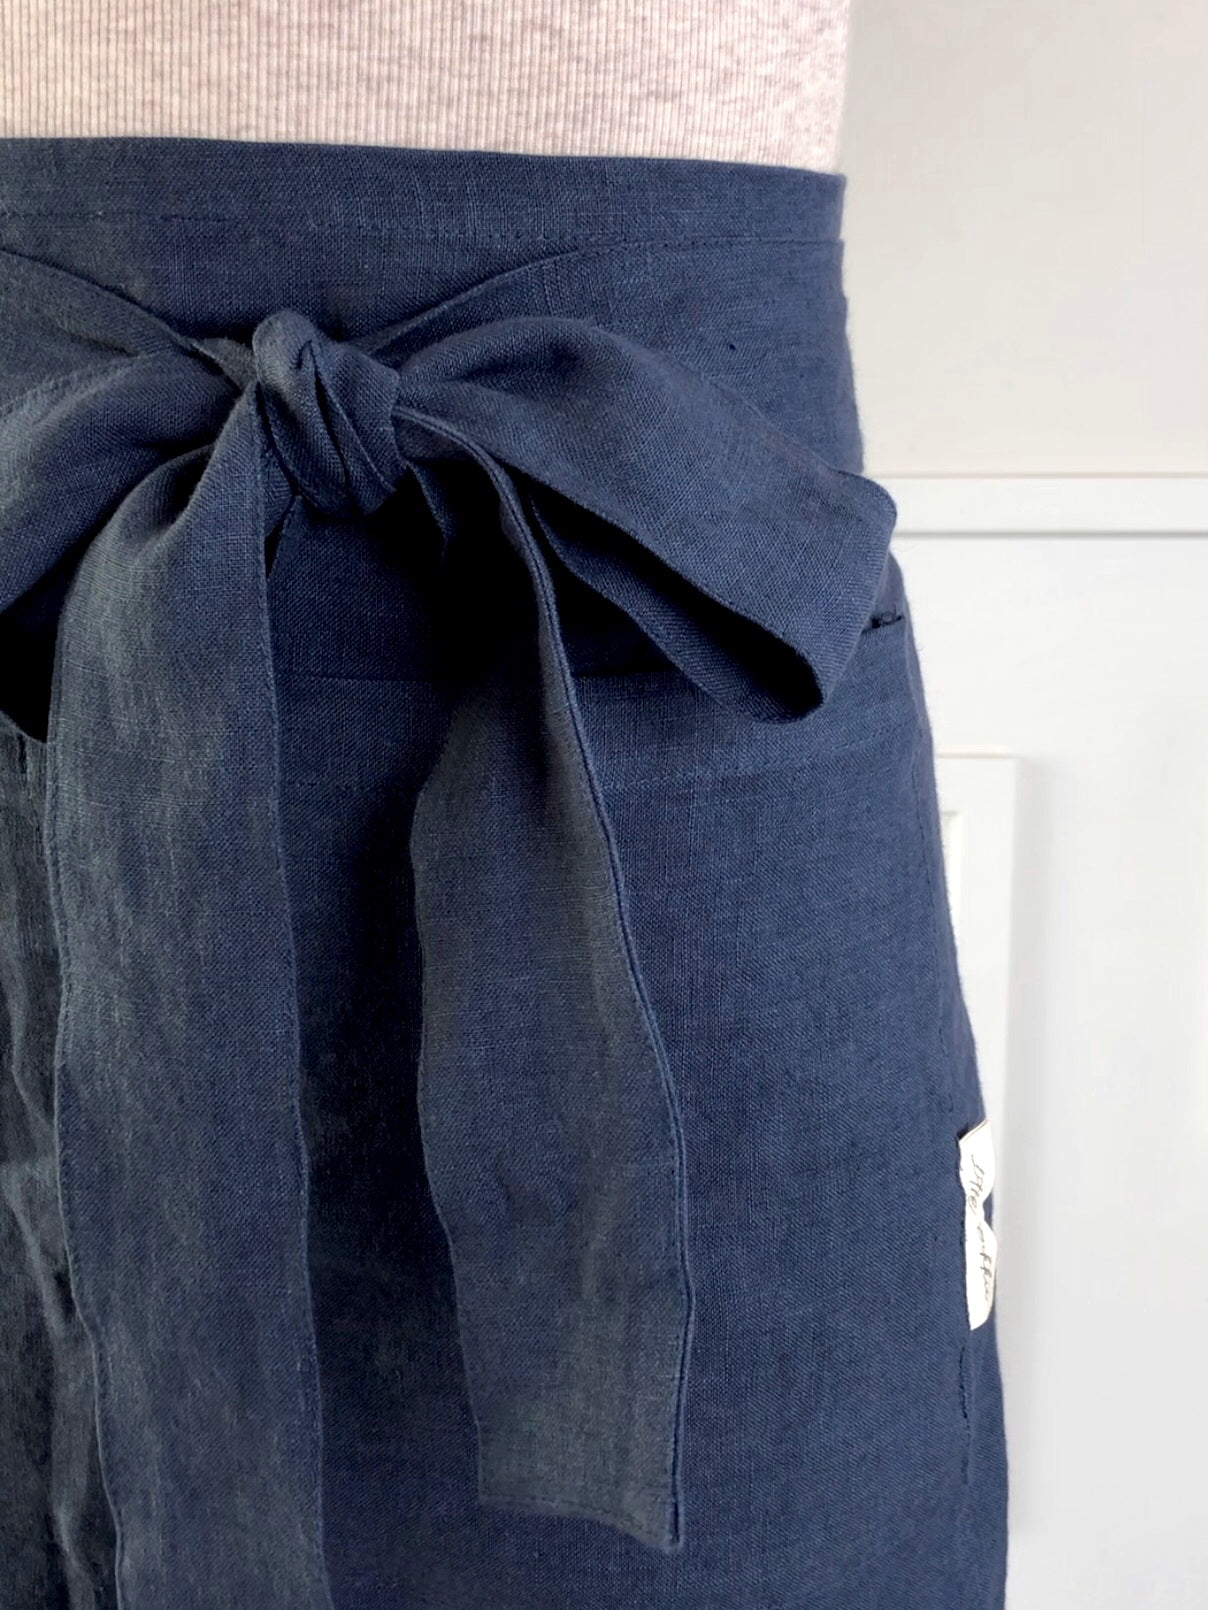 100% linen half waist apron. Large front pocket. Long ties can be fastened at the back or at the front, creating a large bow. Slate blue colour way.